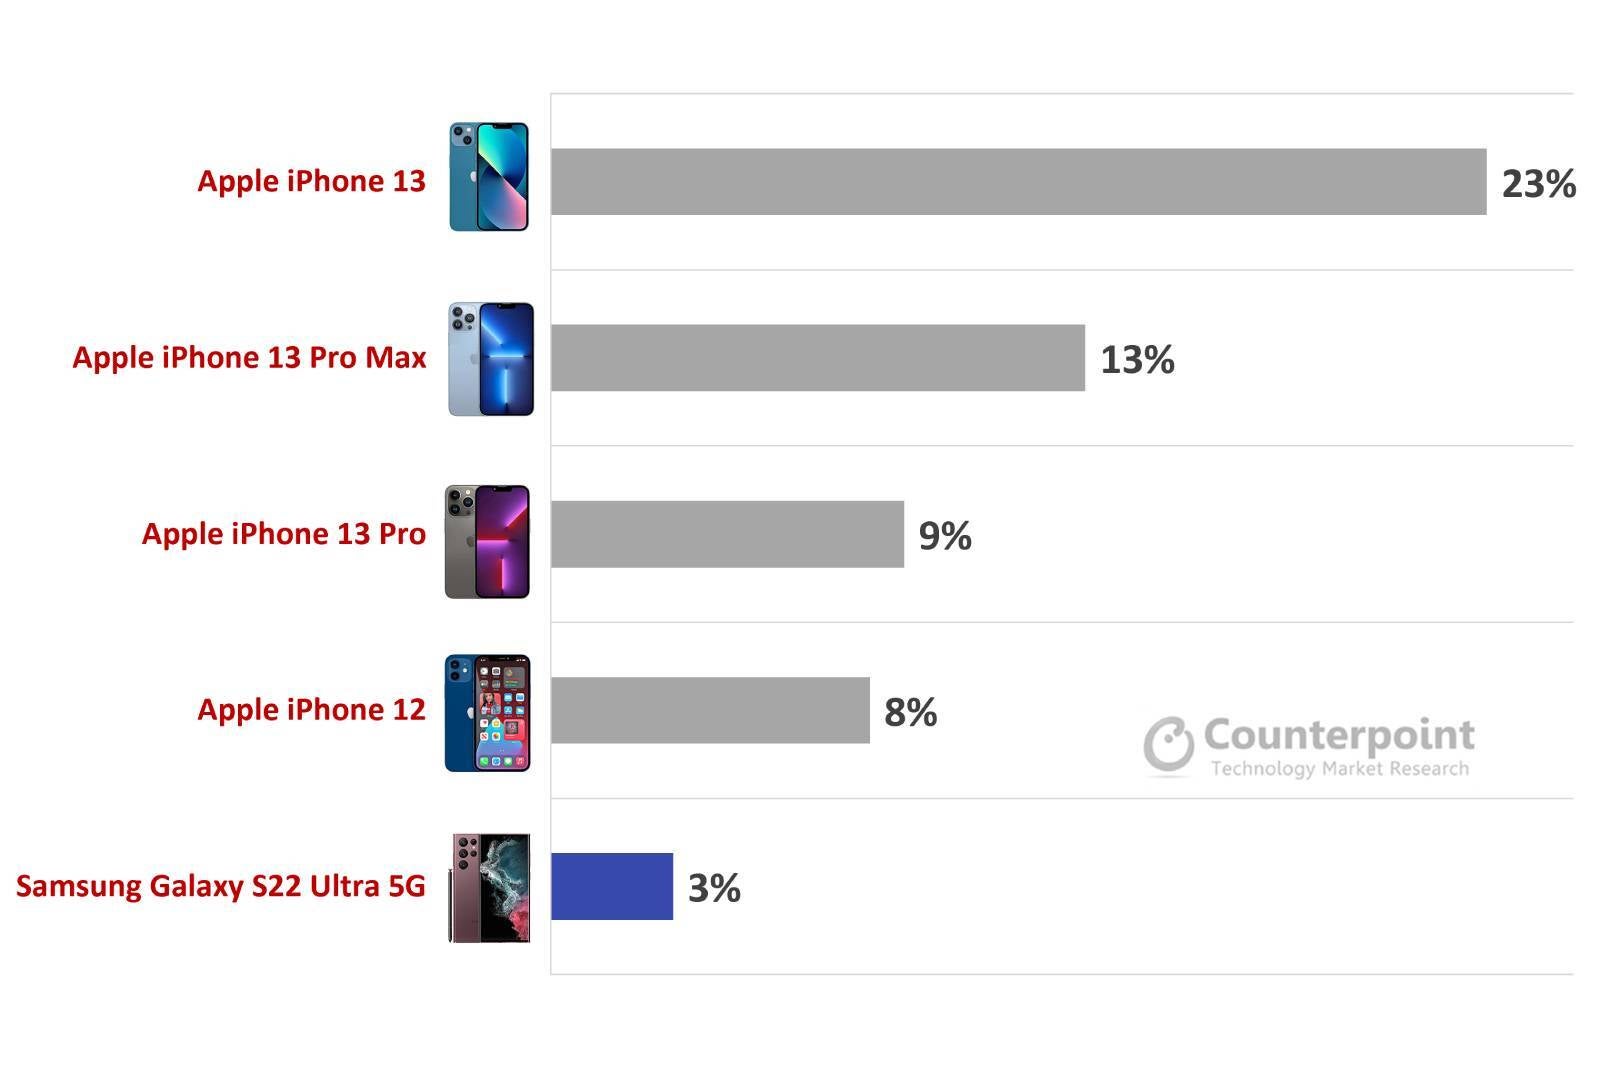 Premium phones are more popular than ever and Apple's destroying the competition